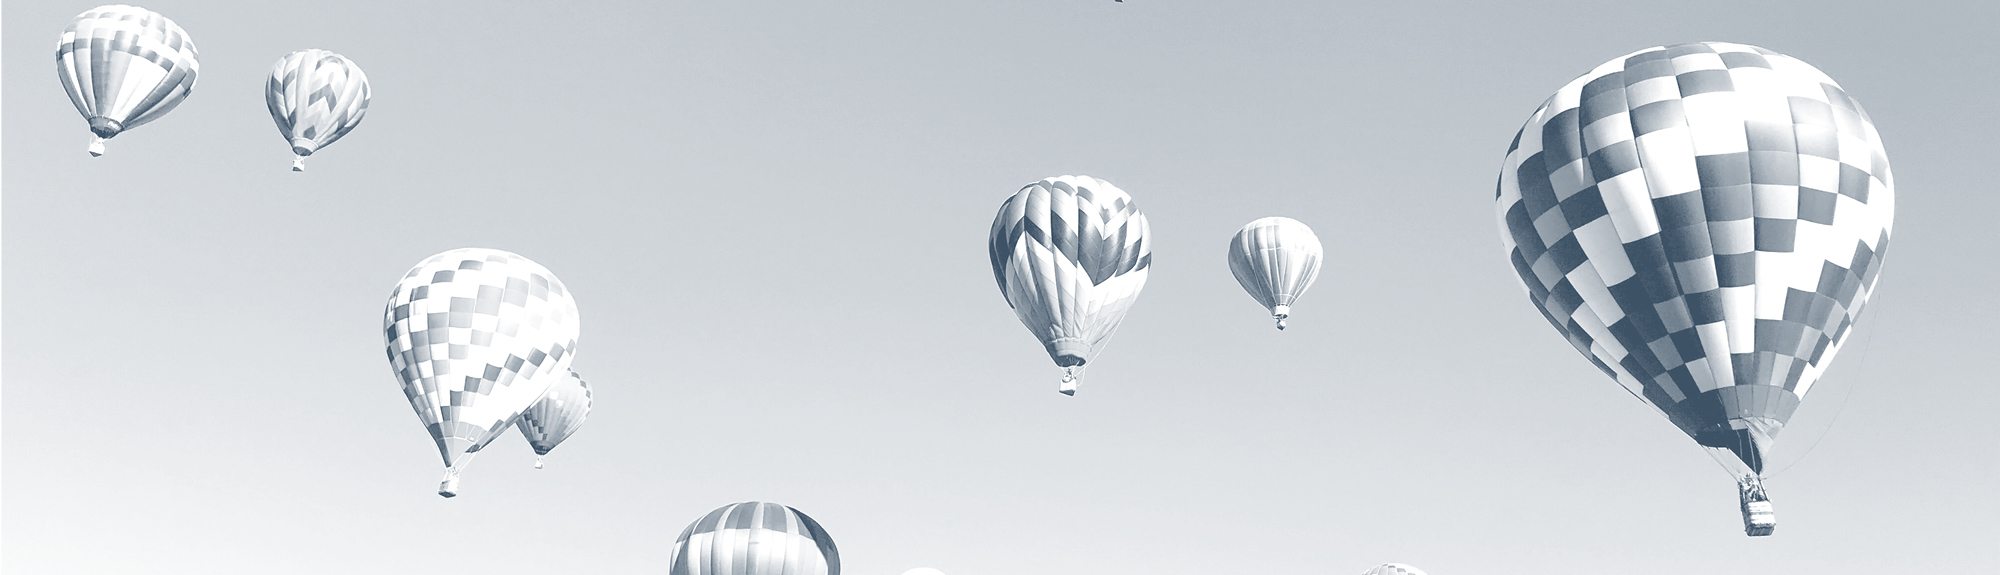 Grey image of several hot air balloons in the sky.